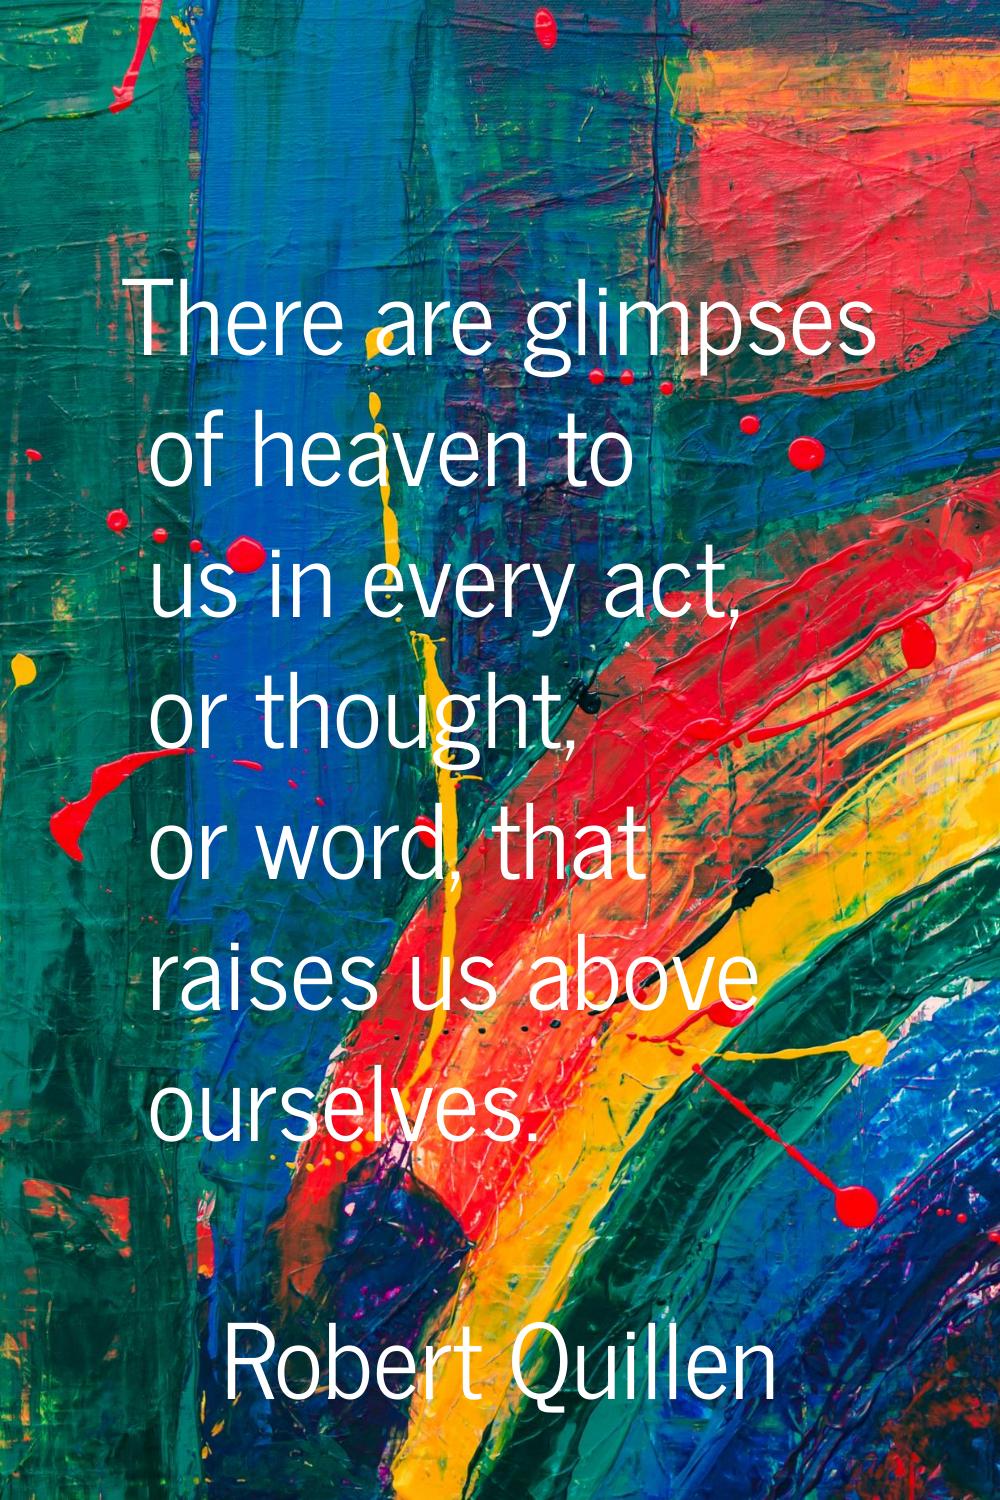 There are glimpses of heaven to us in every act, or thought, or word, that raises us above ourselve